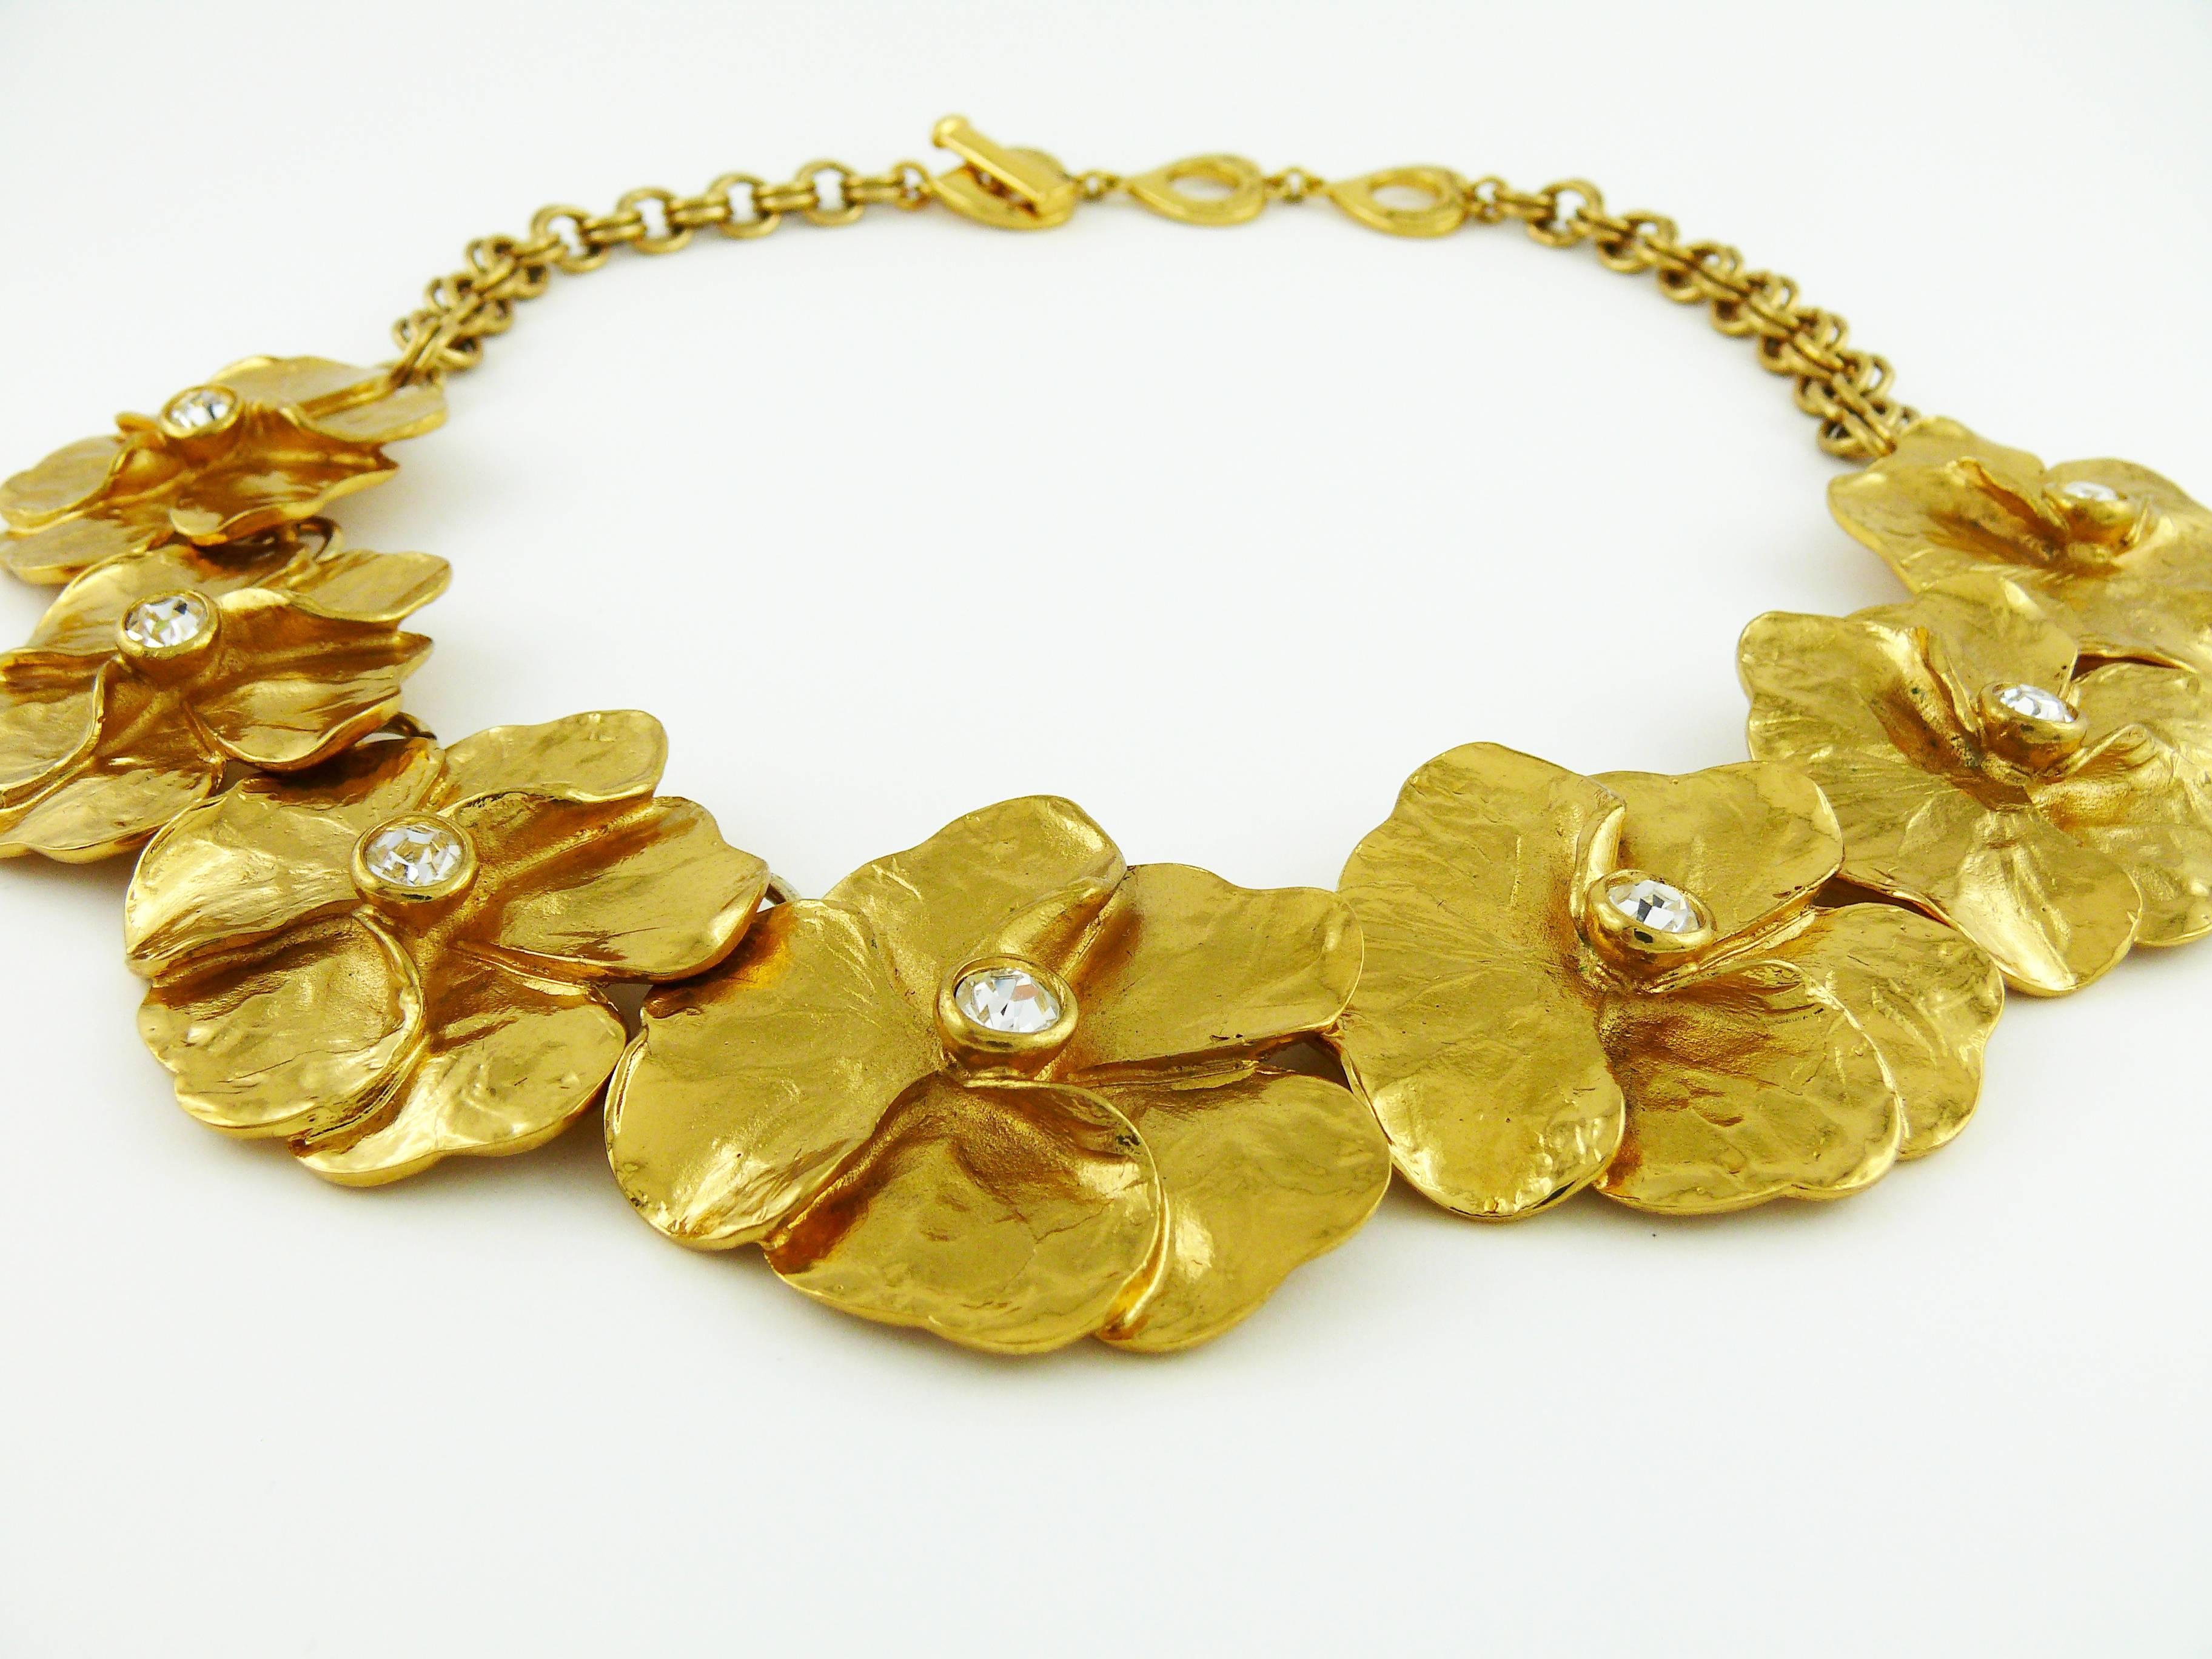 YVES SAINT LAURENT vintage gold tone floral necklace featuring seven beautiful pansies with clear crystal embellishement.

Marked YVES SAINT LAURENT Made in France.

Indicative measurements : total length approx. 51 cm (20.08 inches) / adjustable